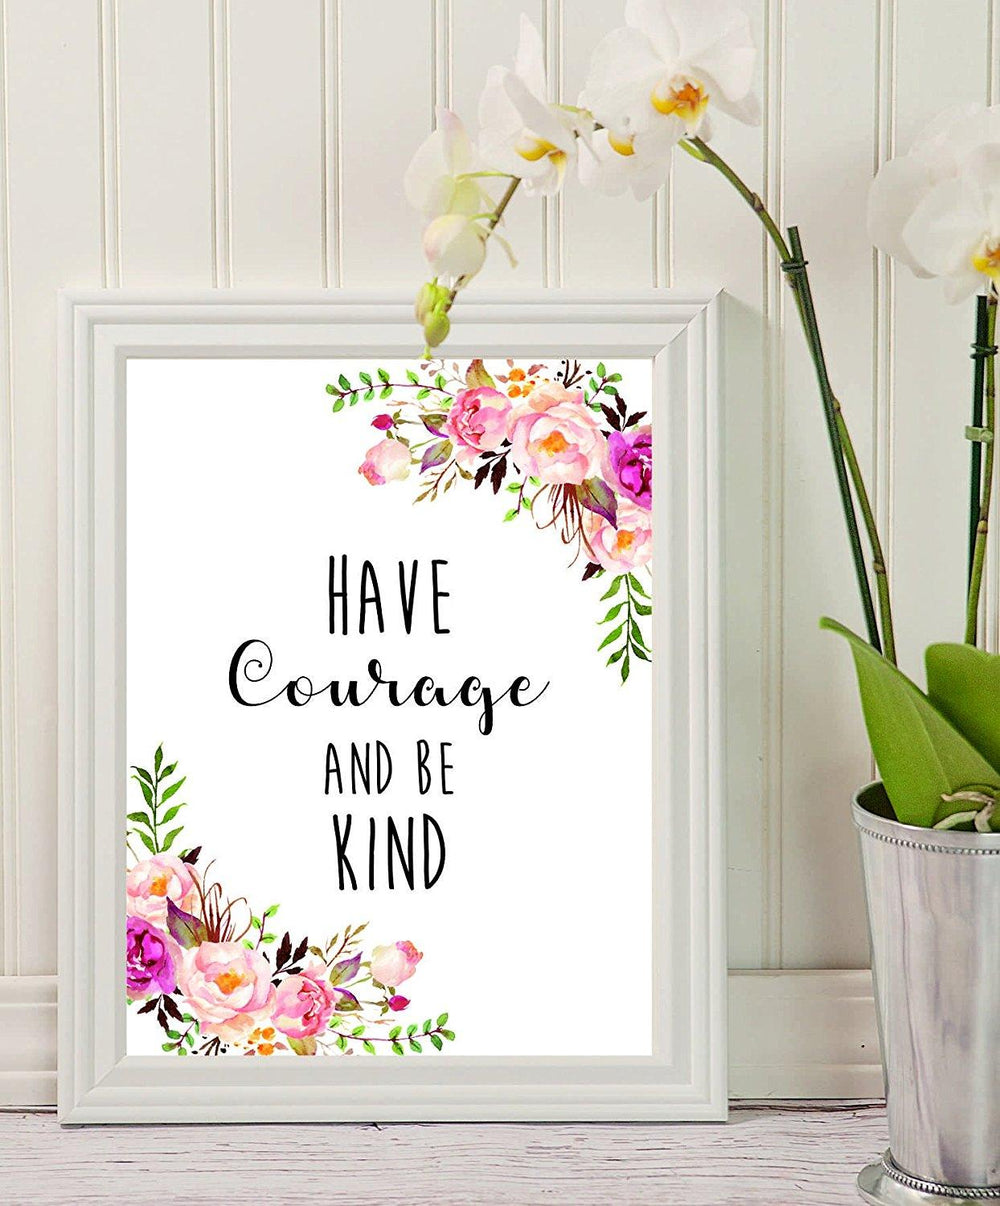 Wall Art - Have Courage and Be Kind - mom gift - teacher gift- small sign- Printable Quote - Motivational Print - Wall Decor - Home Decor - College Dorm Room Decorations - Living Room Decor - BOSTON CREATIVE COMPANY